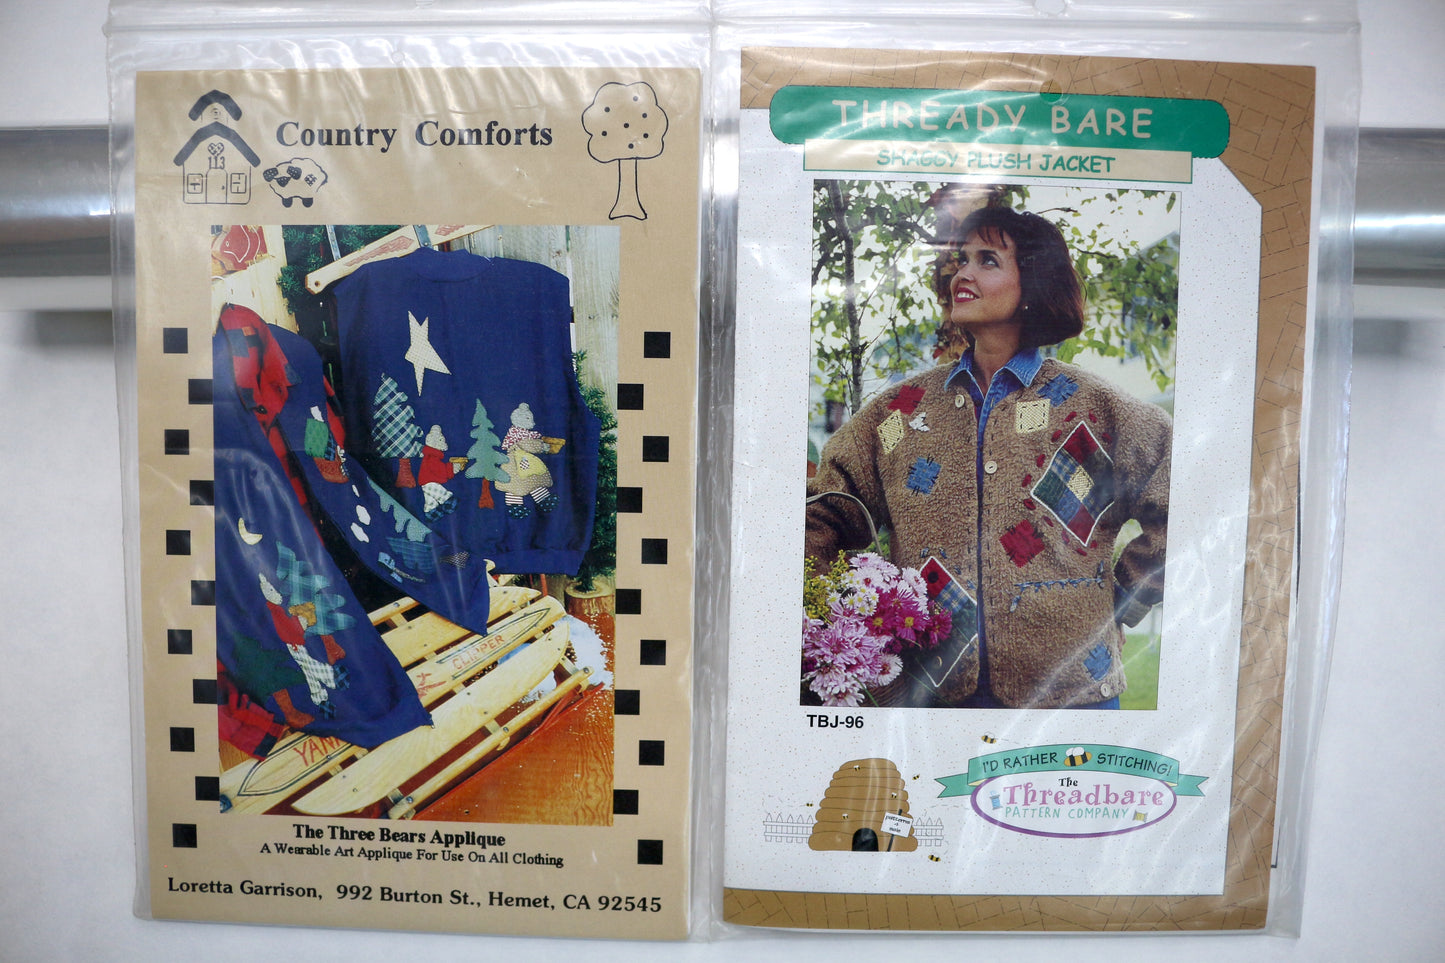 Country Comforts The Three Bears Applique or Thready Bare Shaggy Plush Jacket Pattern